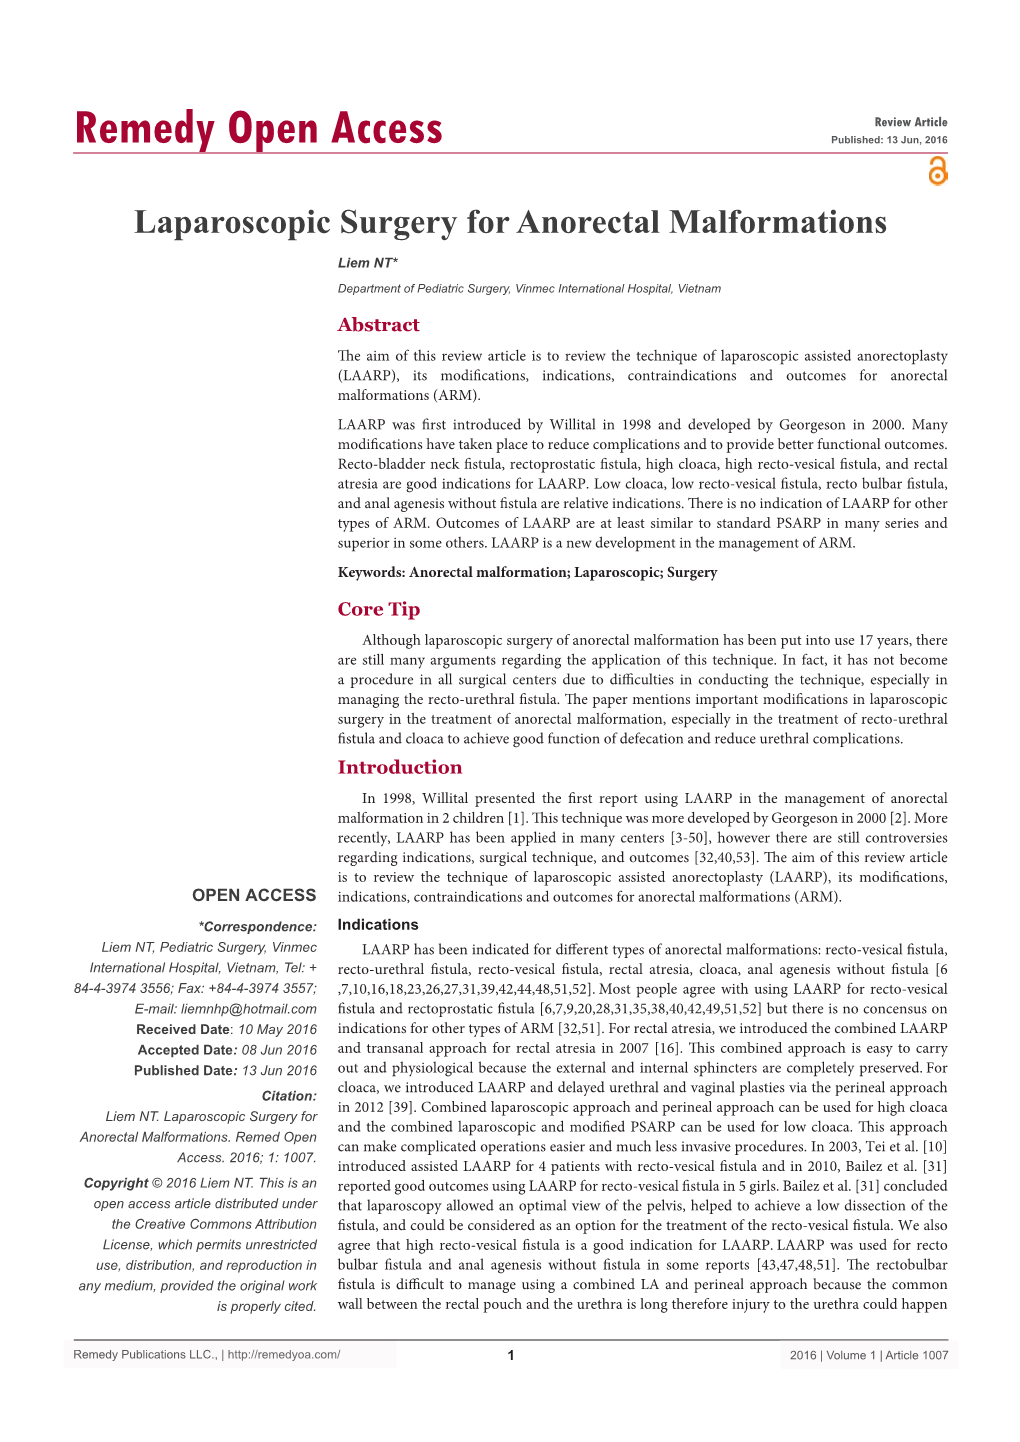 Laparoscopic Surgery for Anorectal Malformations